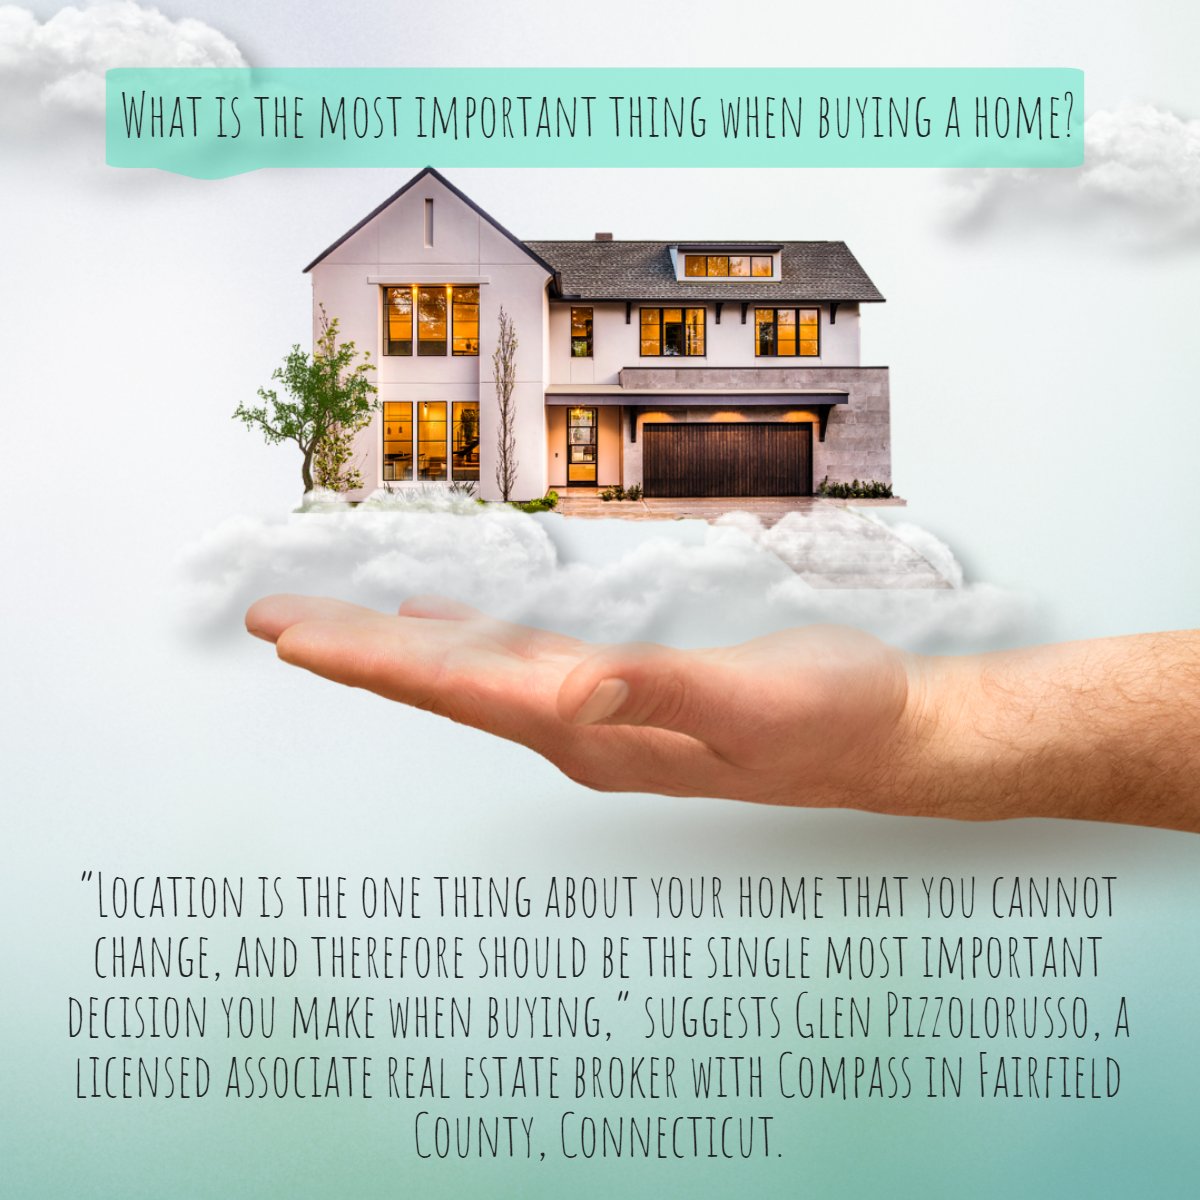 In your opinion, what is the most important thing when buying a home? Is it location, price, or something else?

You can share your opinion below!

#buyingahome101 #buyingahome